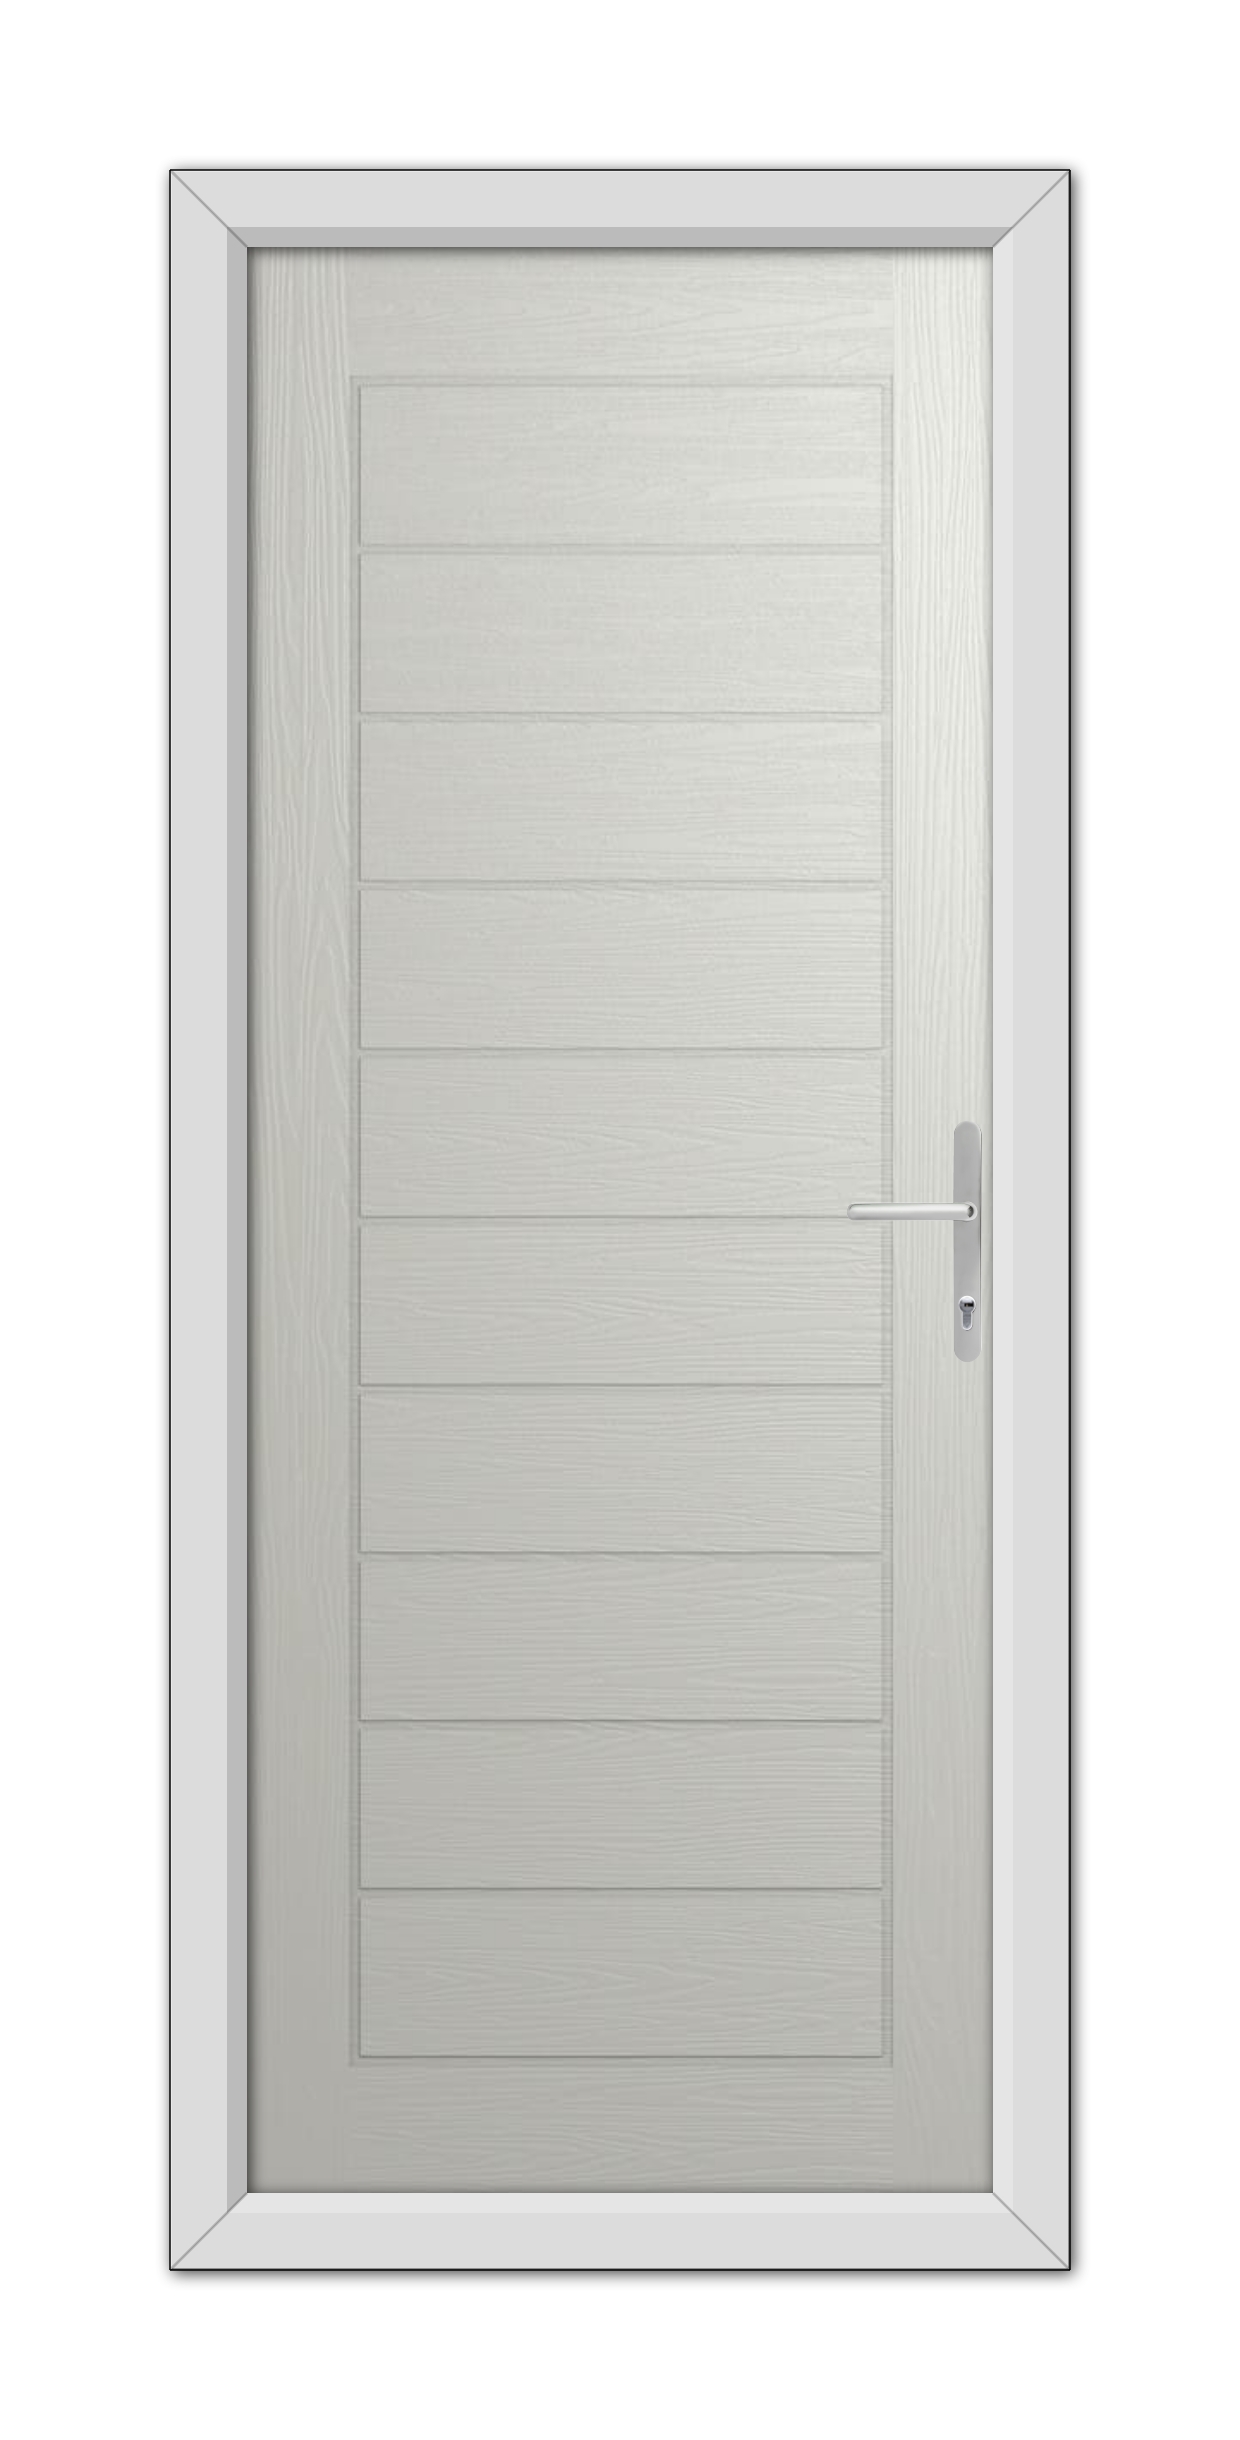 A modern white Agate Grey Cambridge Composite Door 48mm Timber Core with horizontal panels and a silver handle, set within a grey door frame.